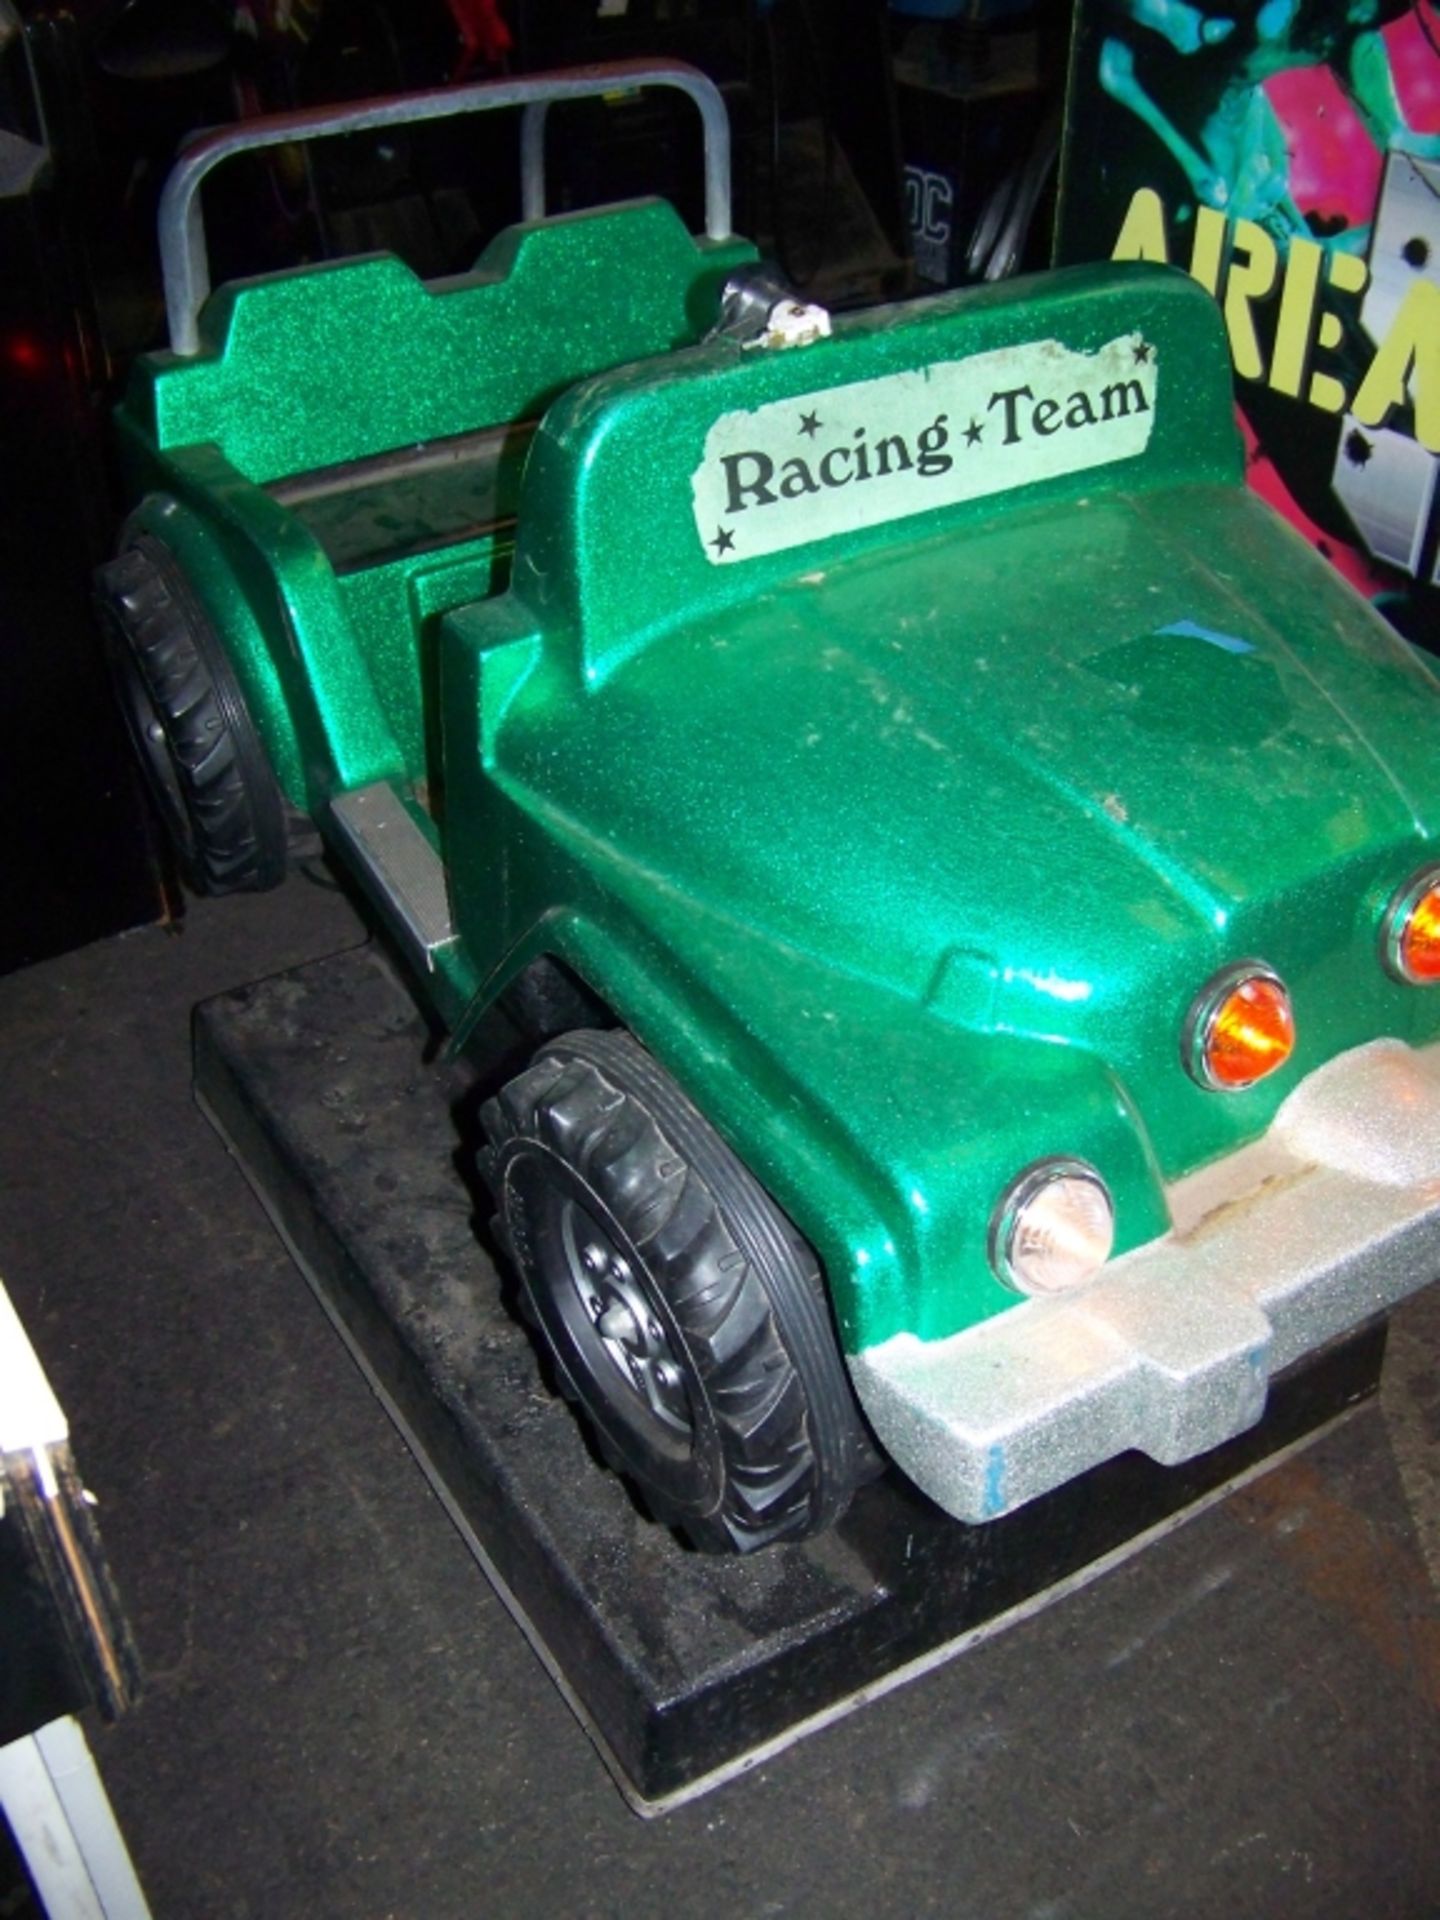 KIDDIE RIDE RACE TEAM ARMY JEEP COIN OPERATED